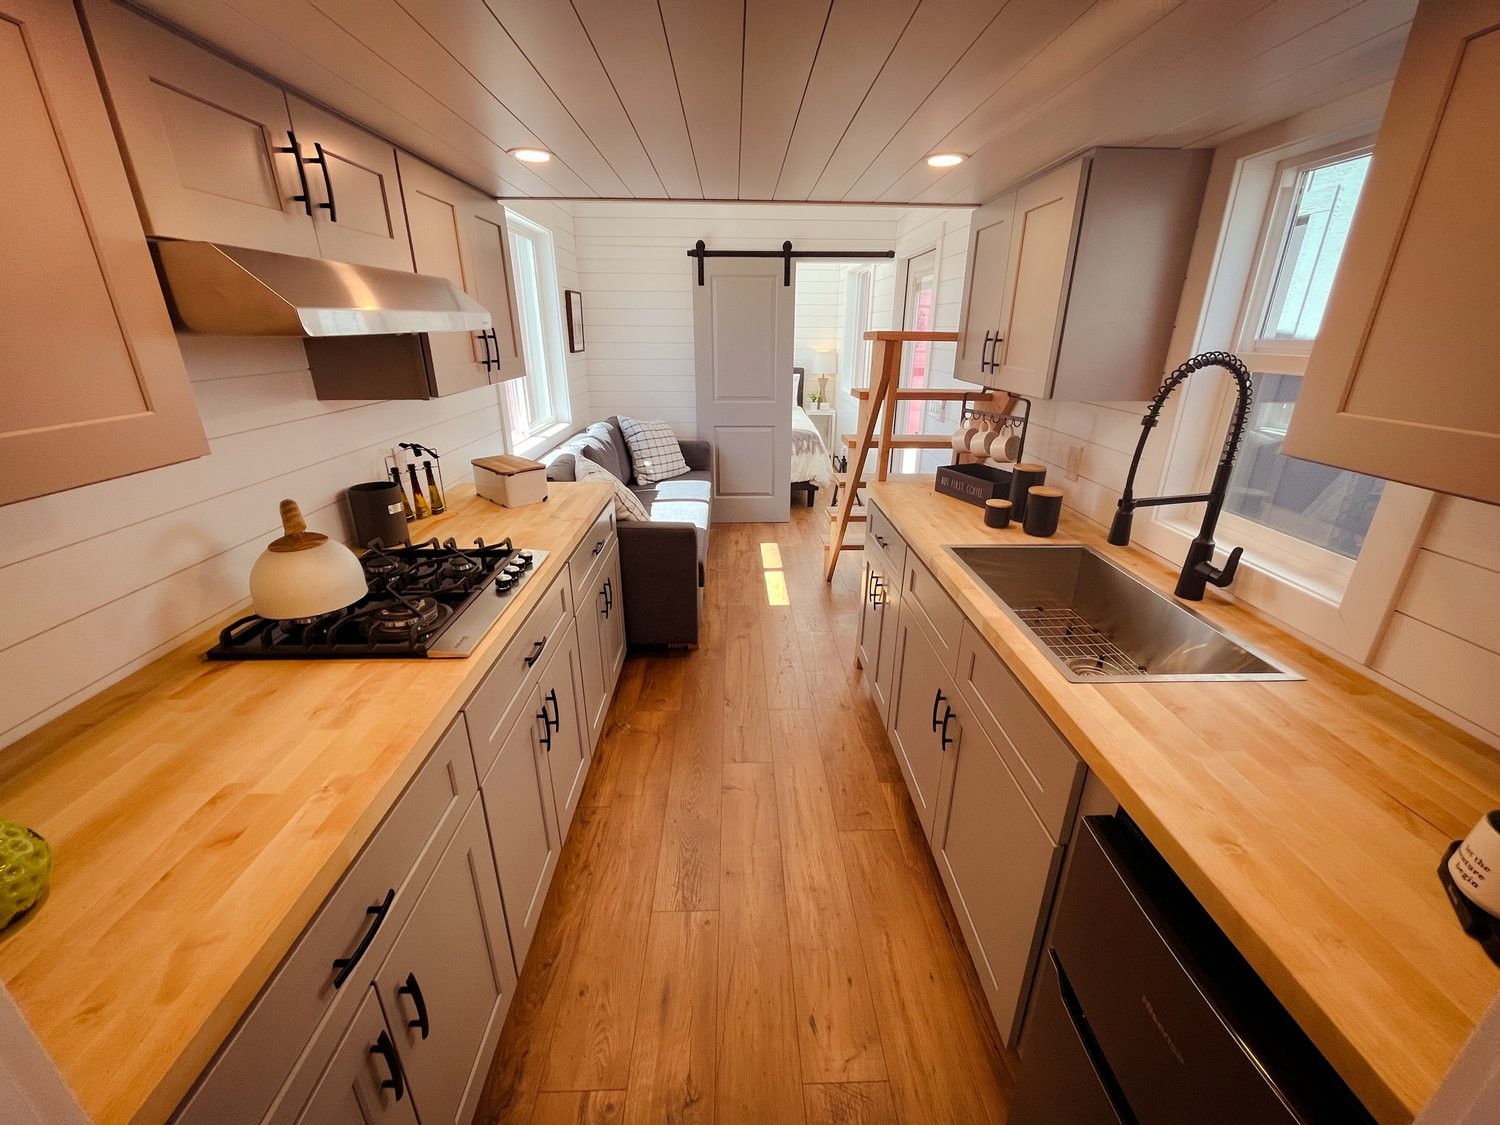 https://s1.cdn.autoevolution.com/images/news/gallery/the-bunkhouse-is-a-beautiful-30-ft-tiny-home-that-pushes-the-limits-of-small-living_4.jpg